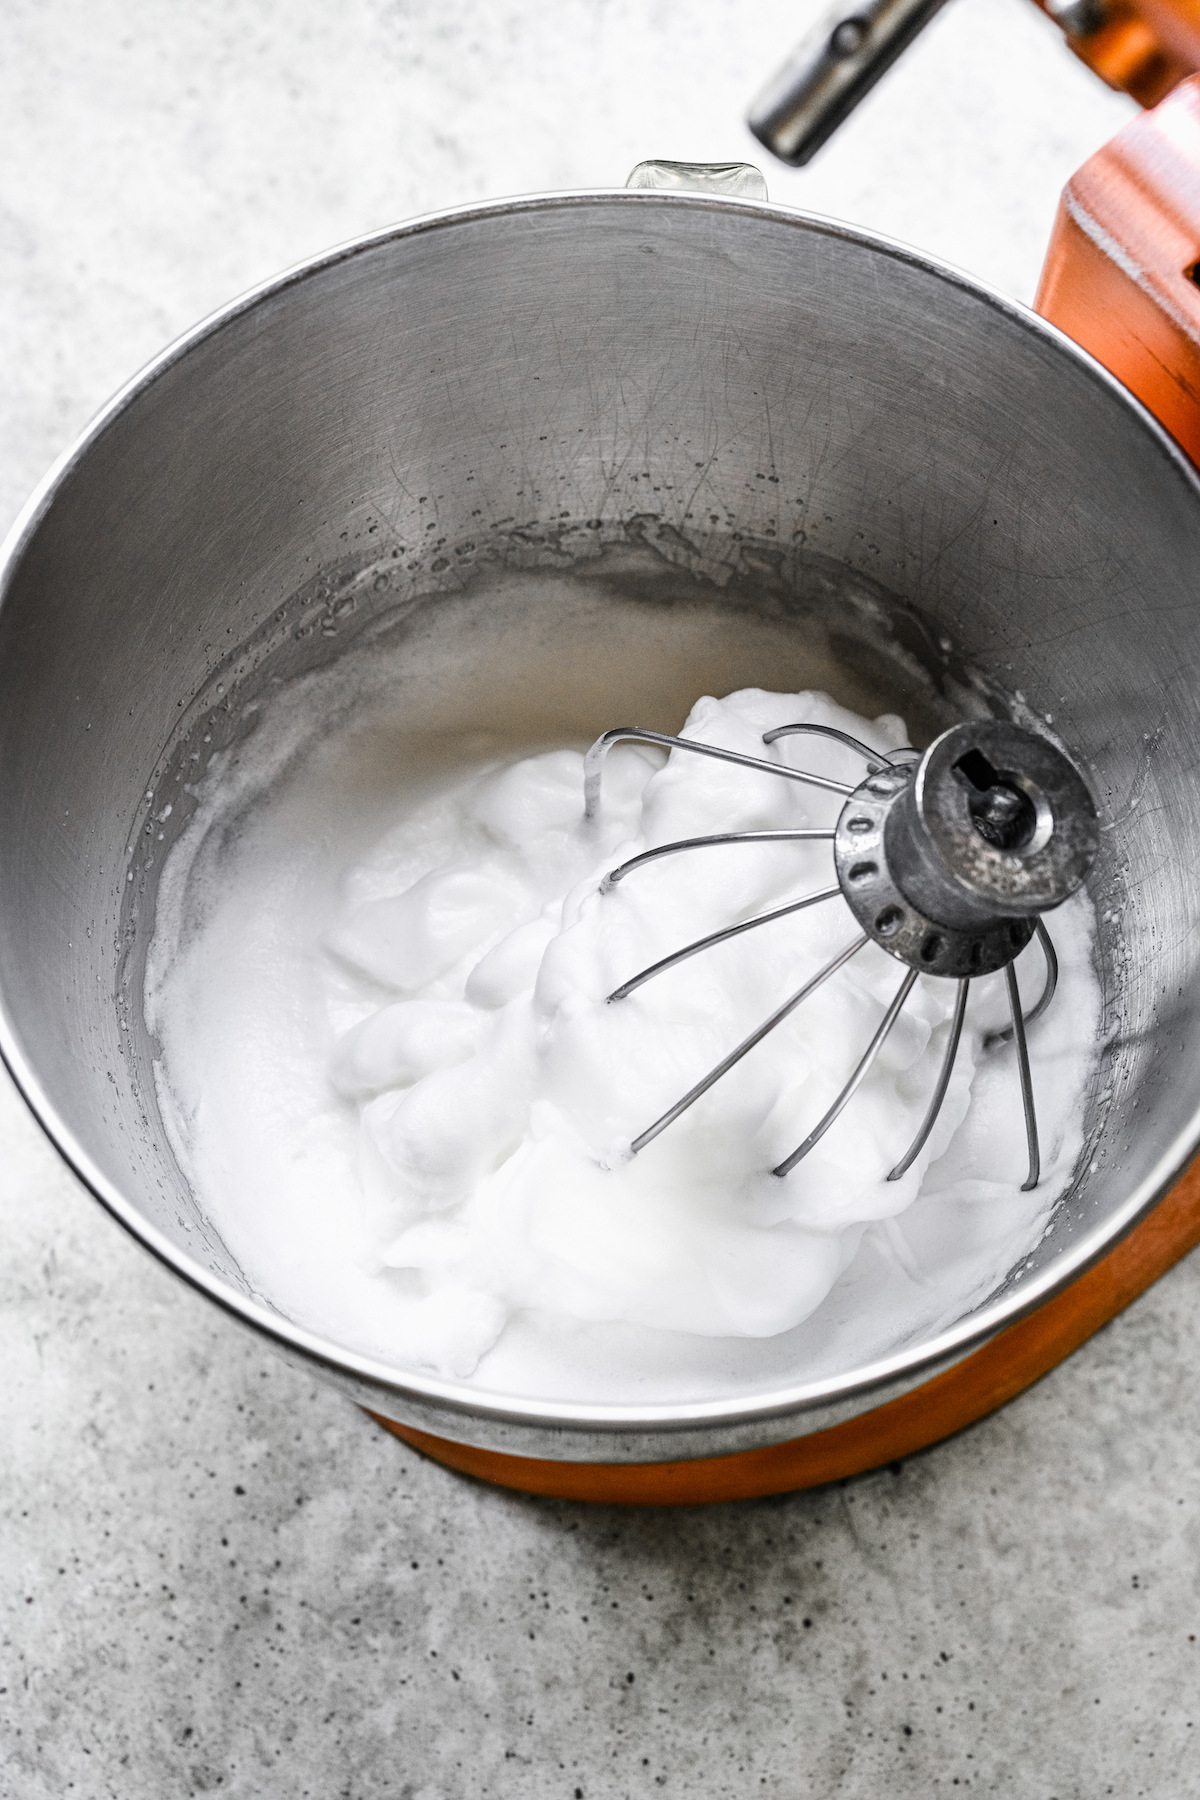 Whipping egg whites in a stand mixer.